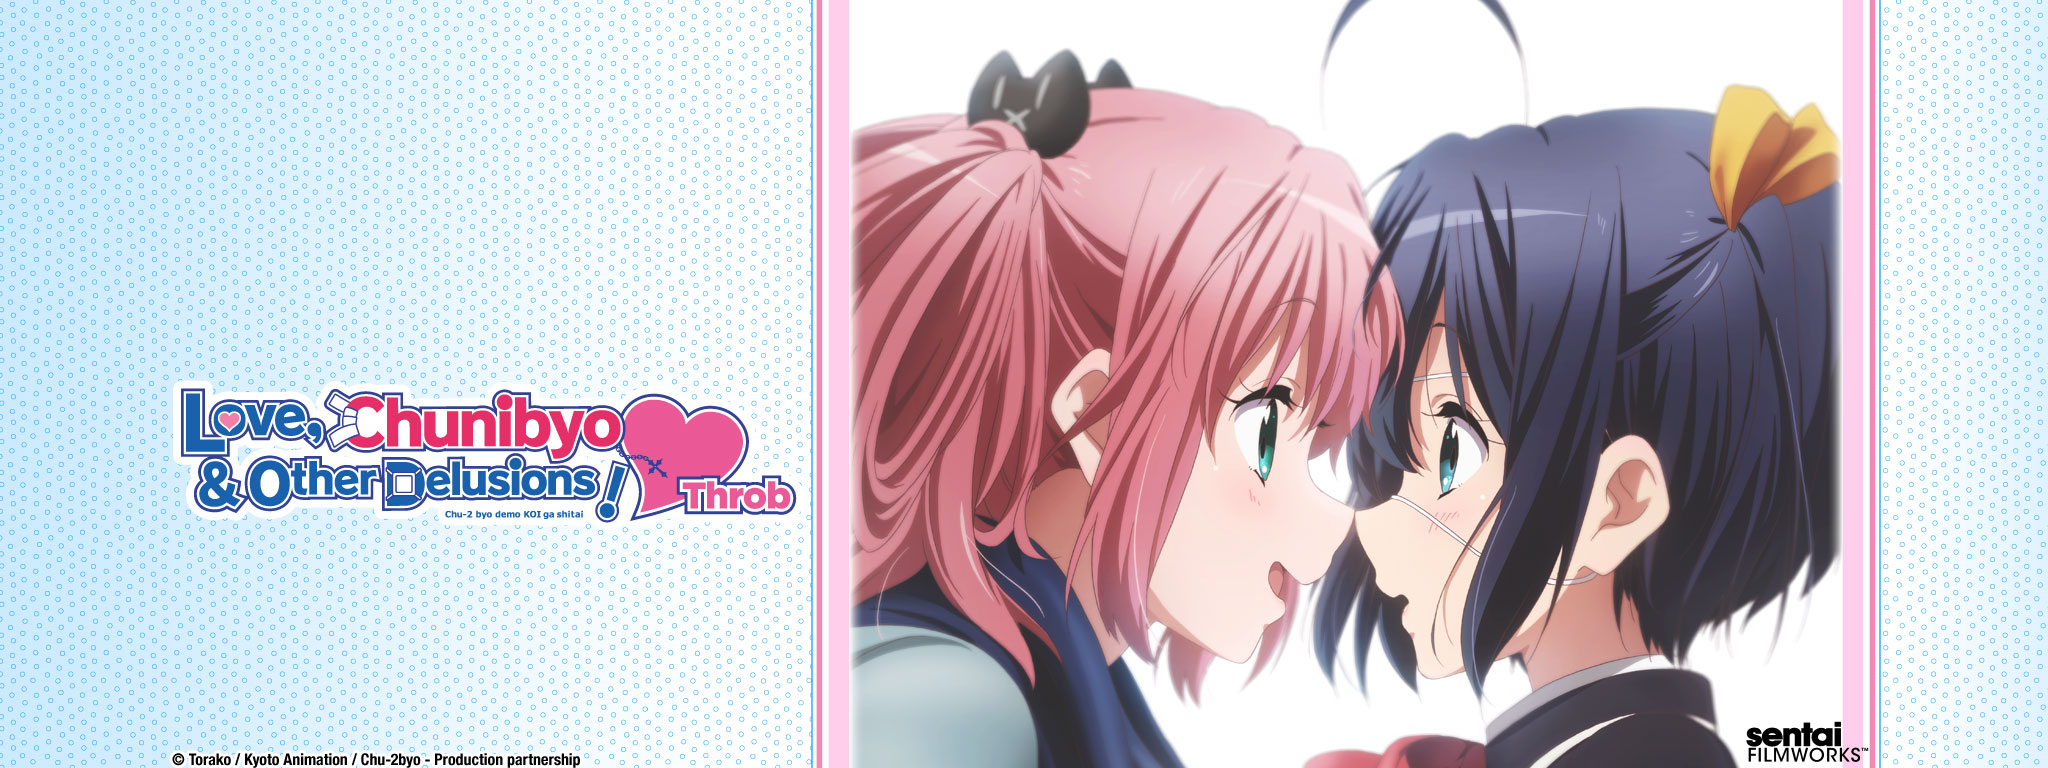 Title Art for Love, Chunibyo & Other Delusions! -Heart Throb-